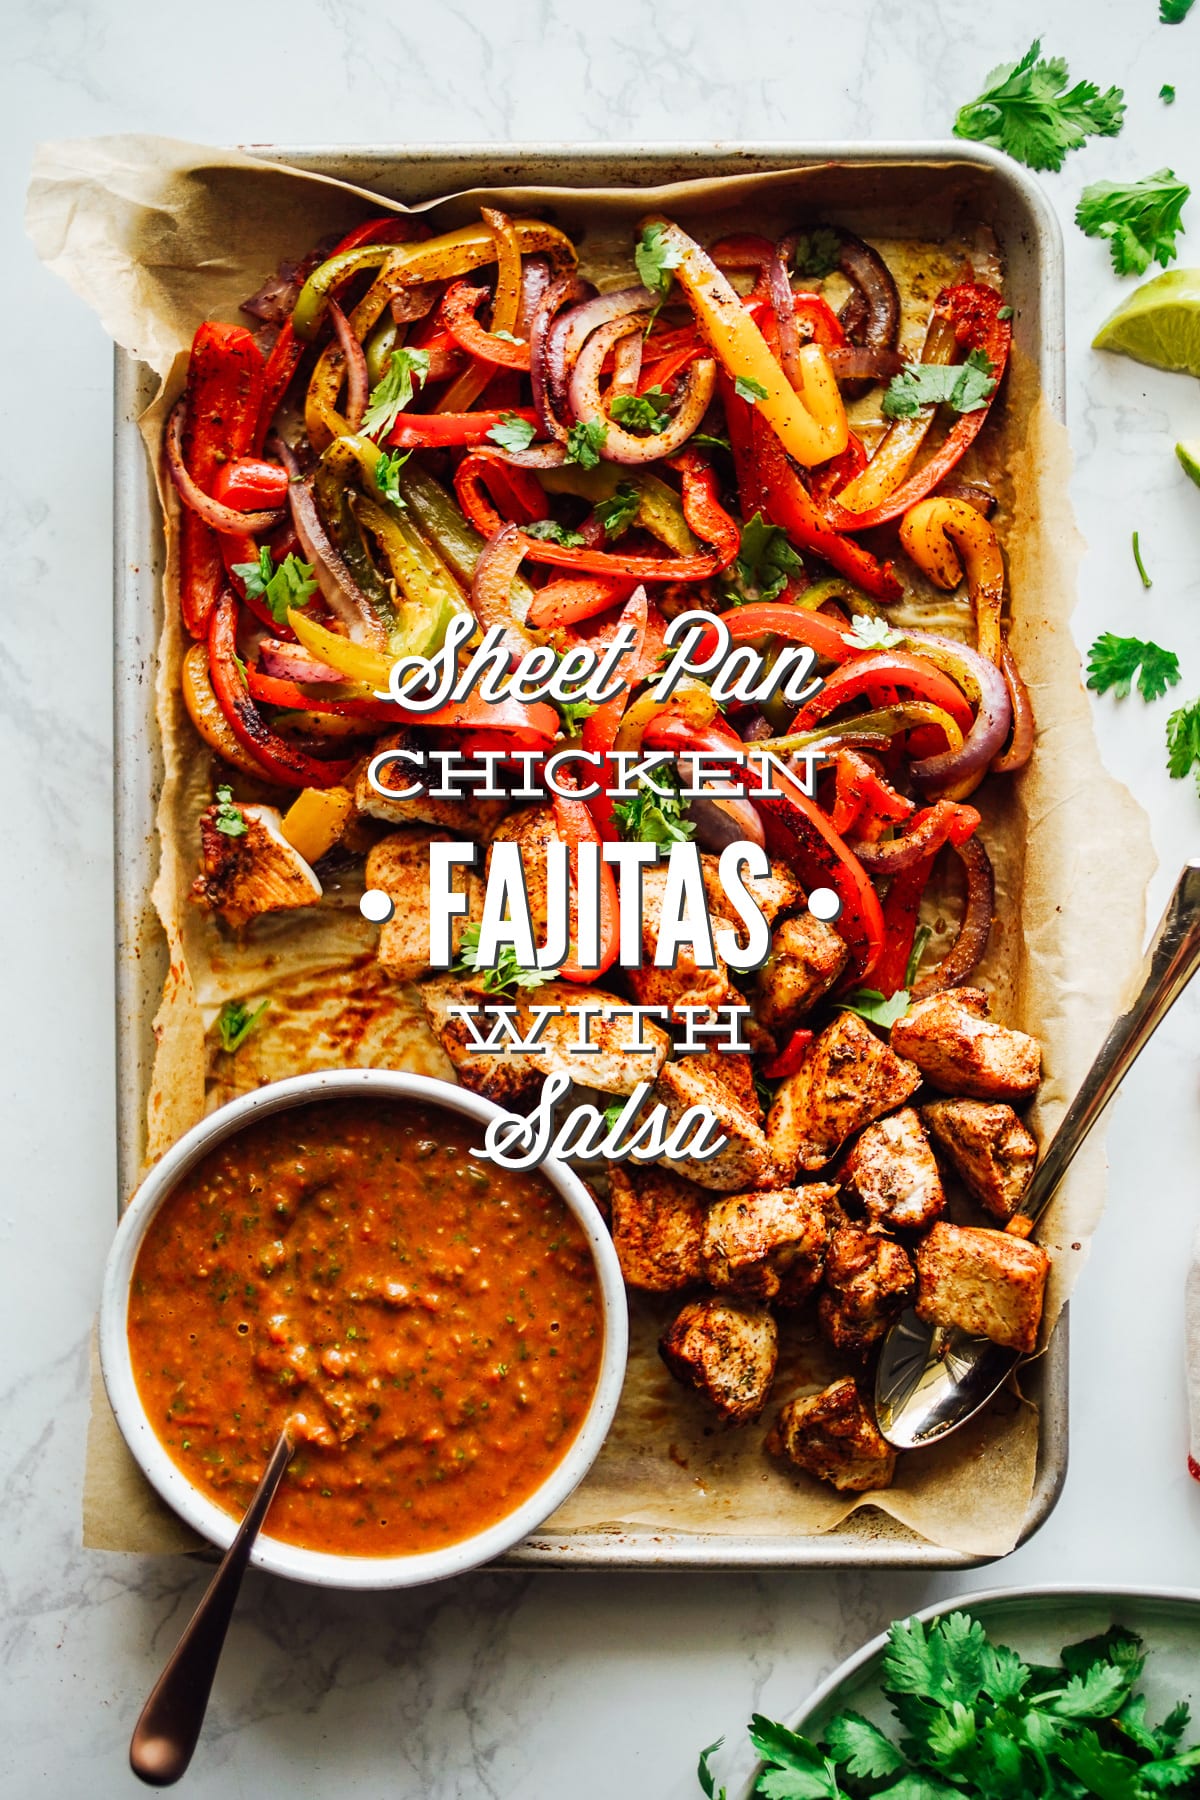 Sheet Pan Chicken Fajitas With Homemade Salsa in Less Than 30 Minutes